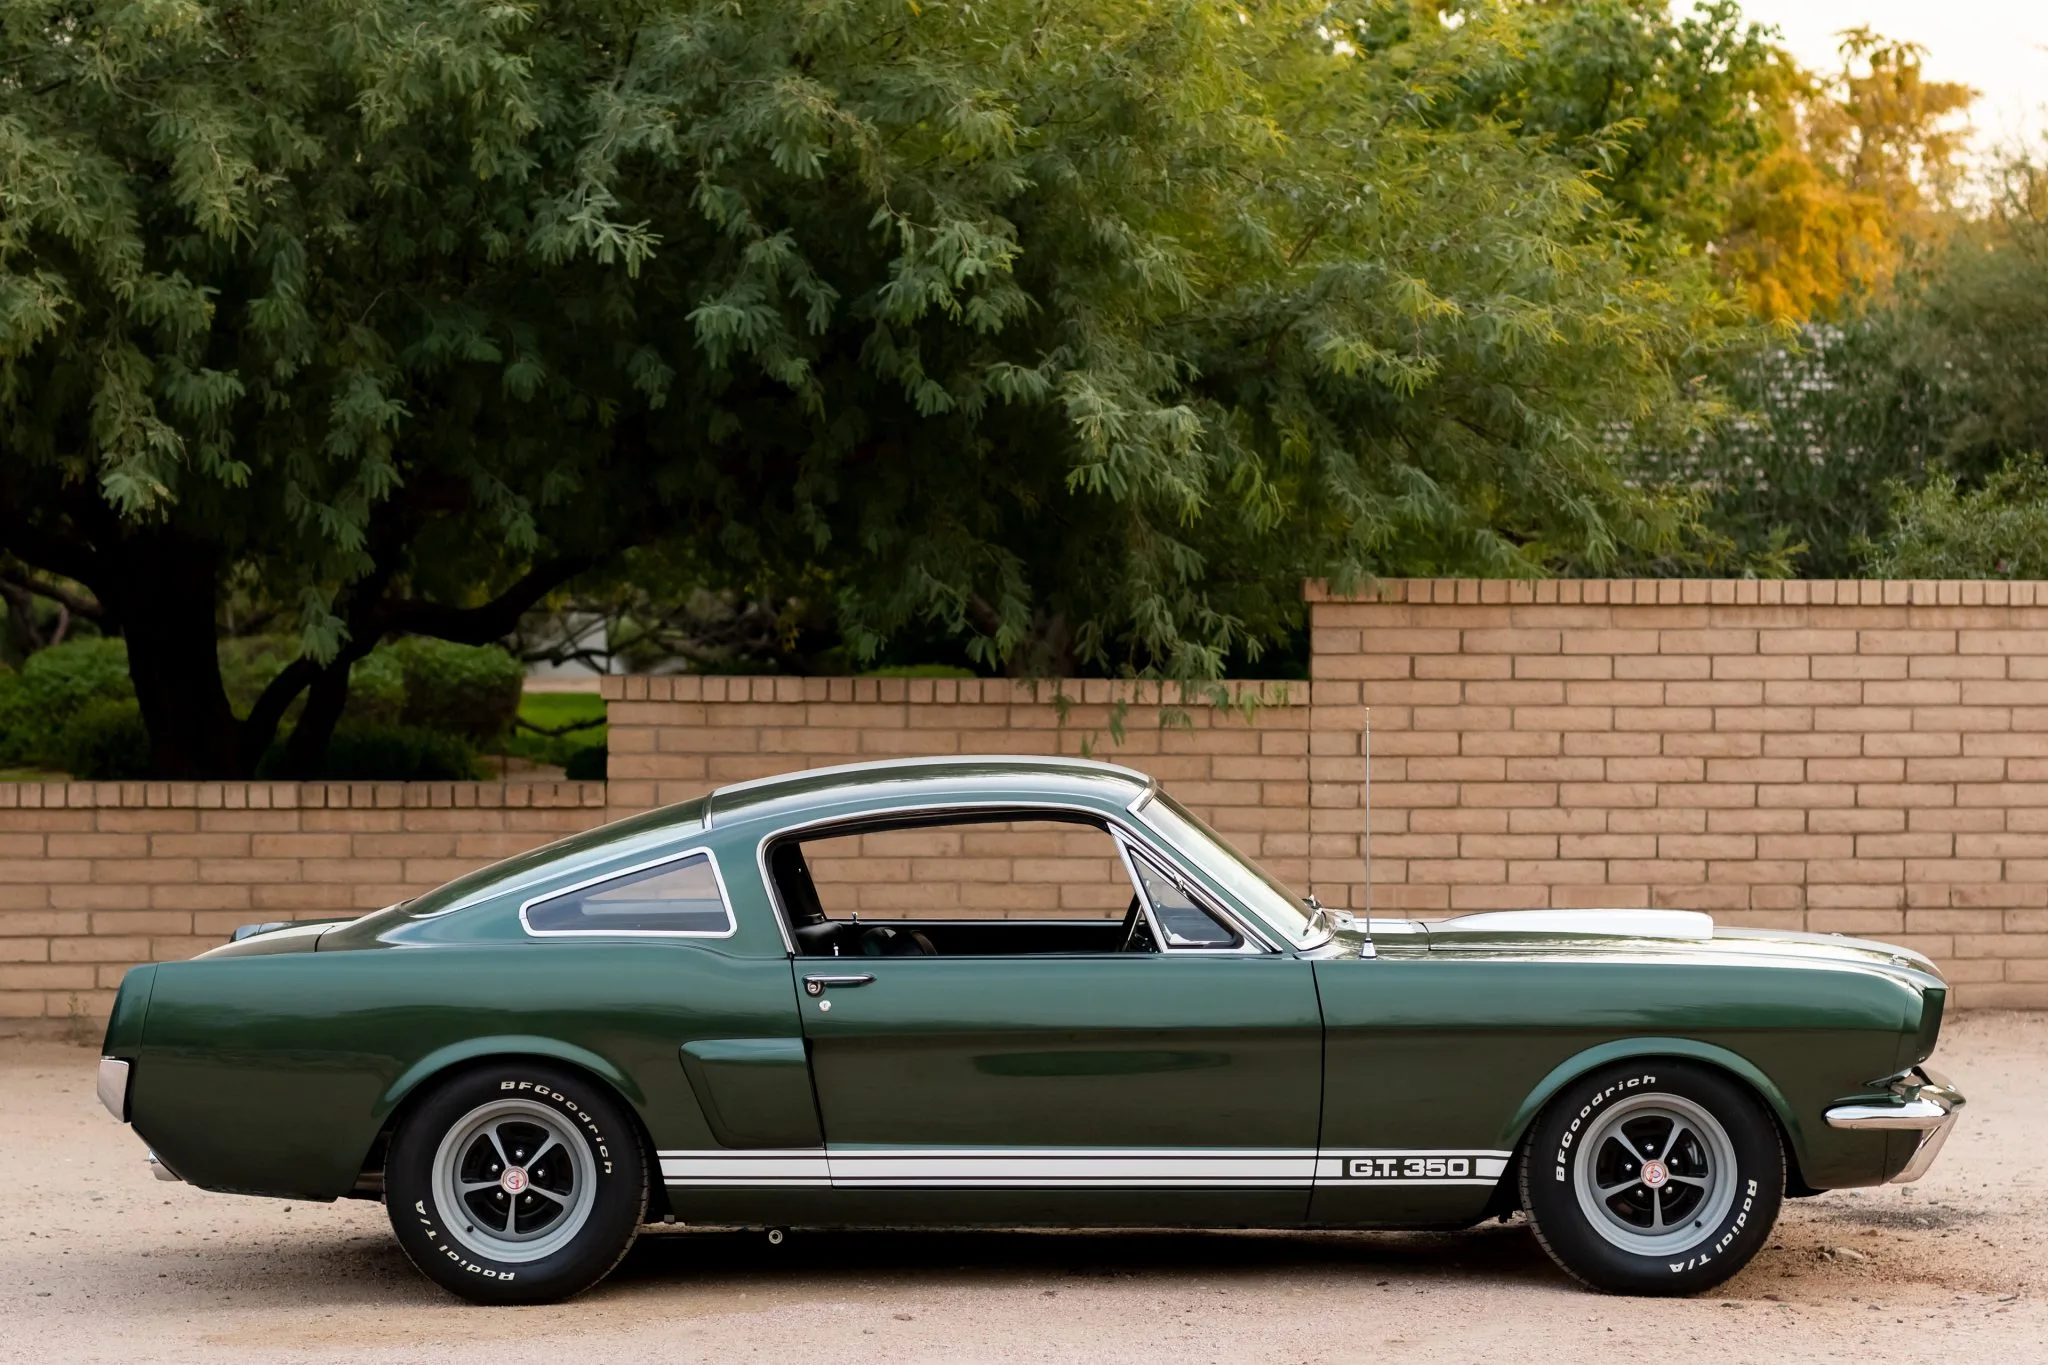 FOR SALE: Ivy Green 1966 Shelby Mustang GT350, Auctions, Bring A Trailer, For Sale, Shelby, Shelby GT350